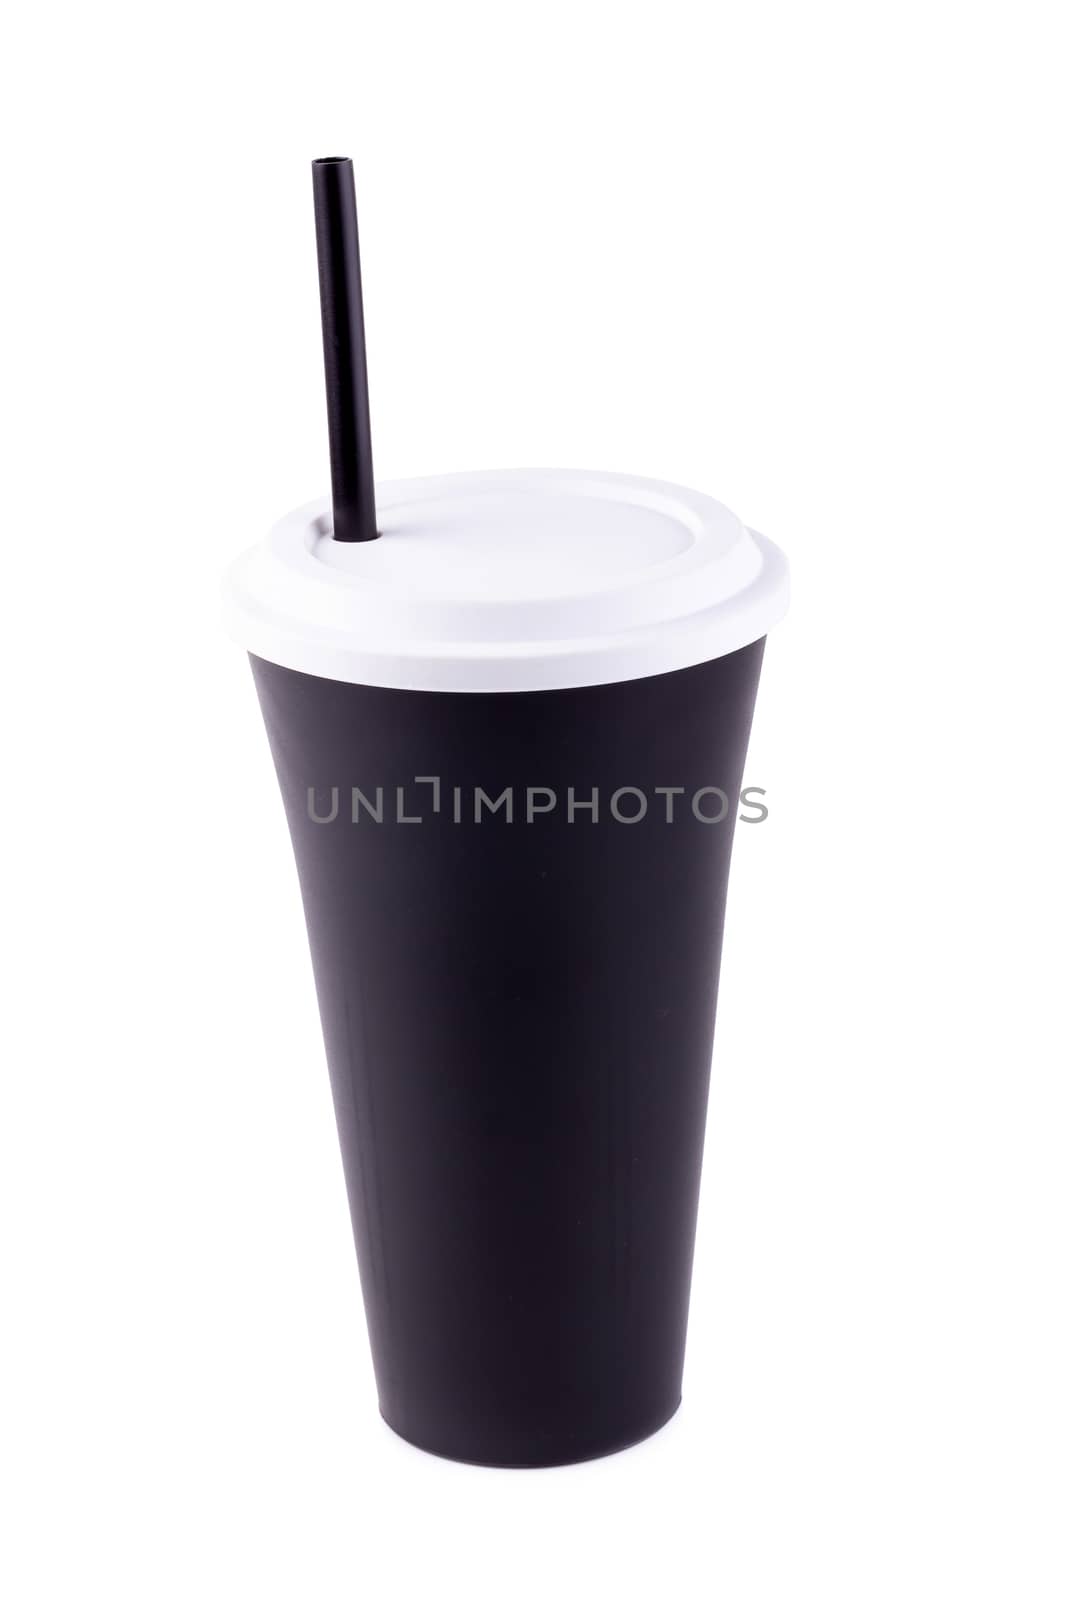 Black Disposable Cup for beverages isolated on white background by kaiskynet